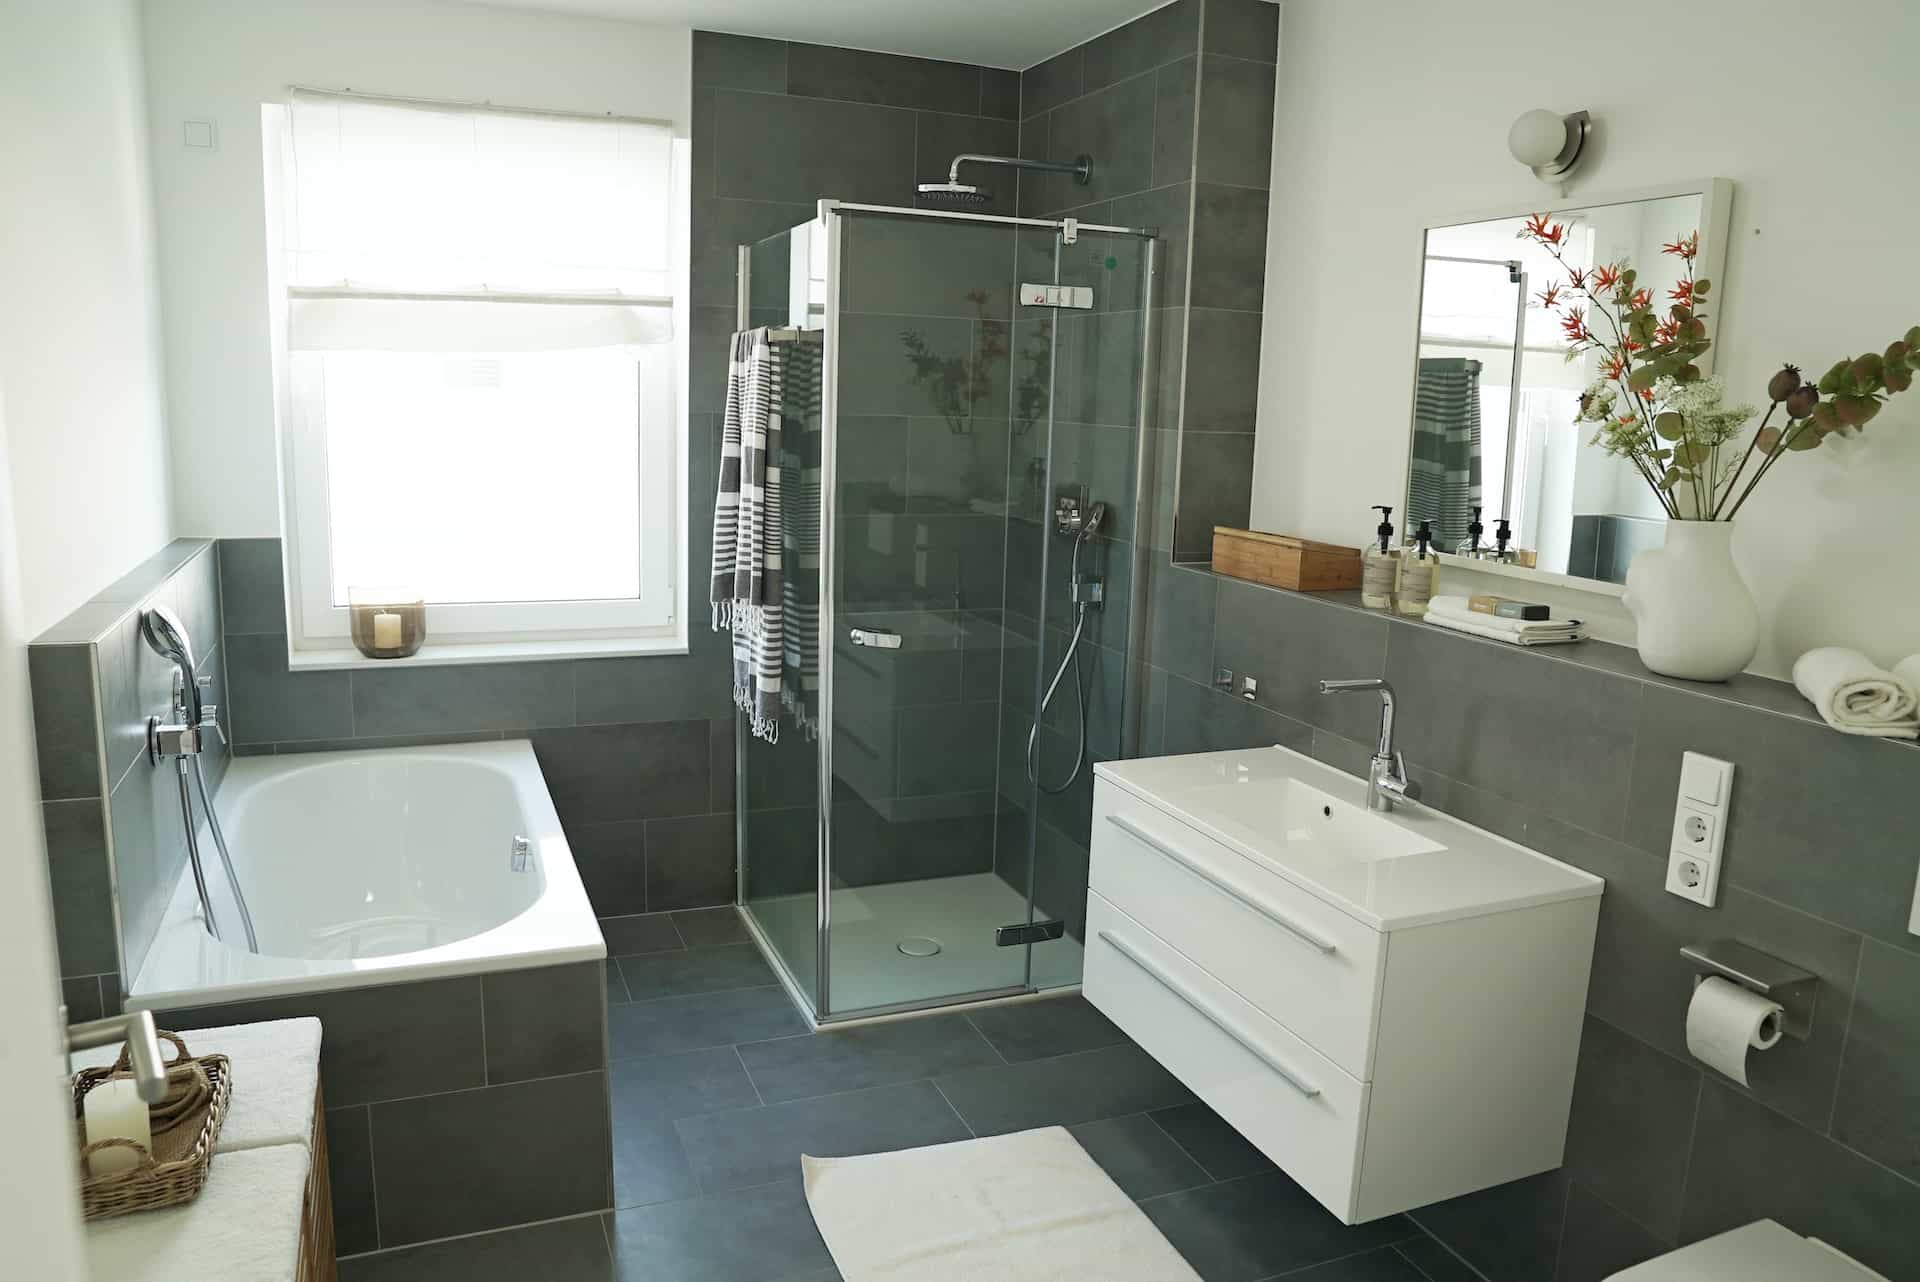 Boost The Value Of Your Home With These Bathroom Design Ideas